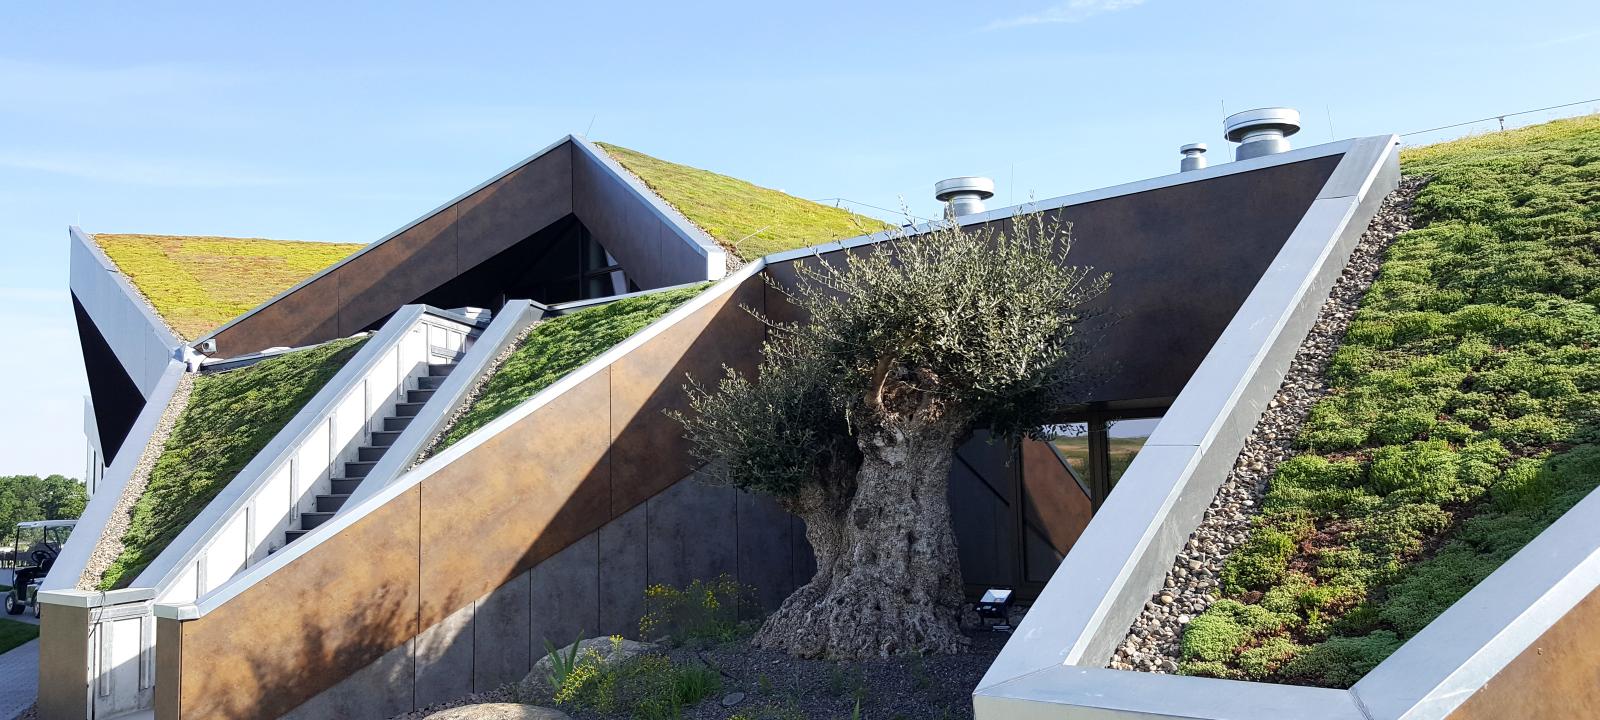 Steep pitched green roof with Sedum